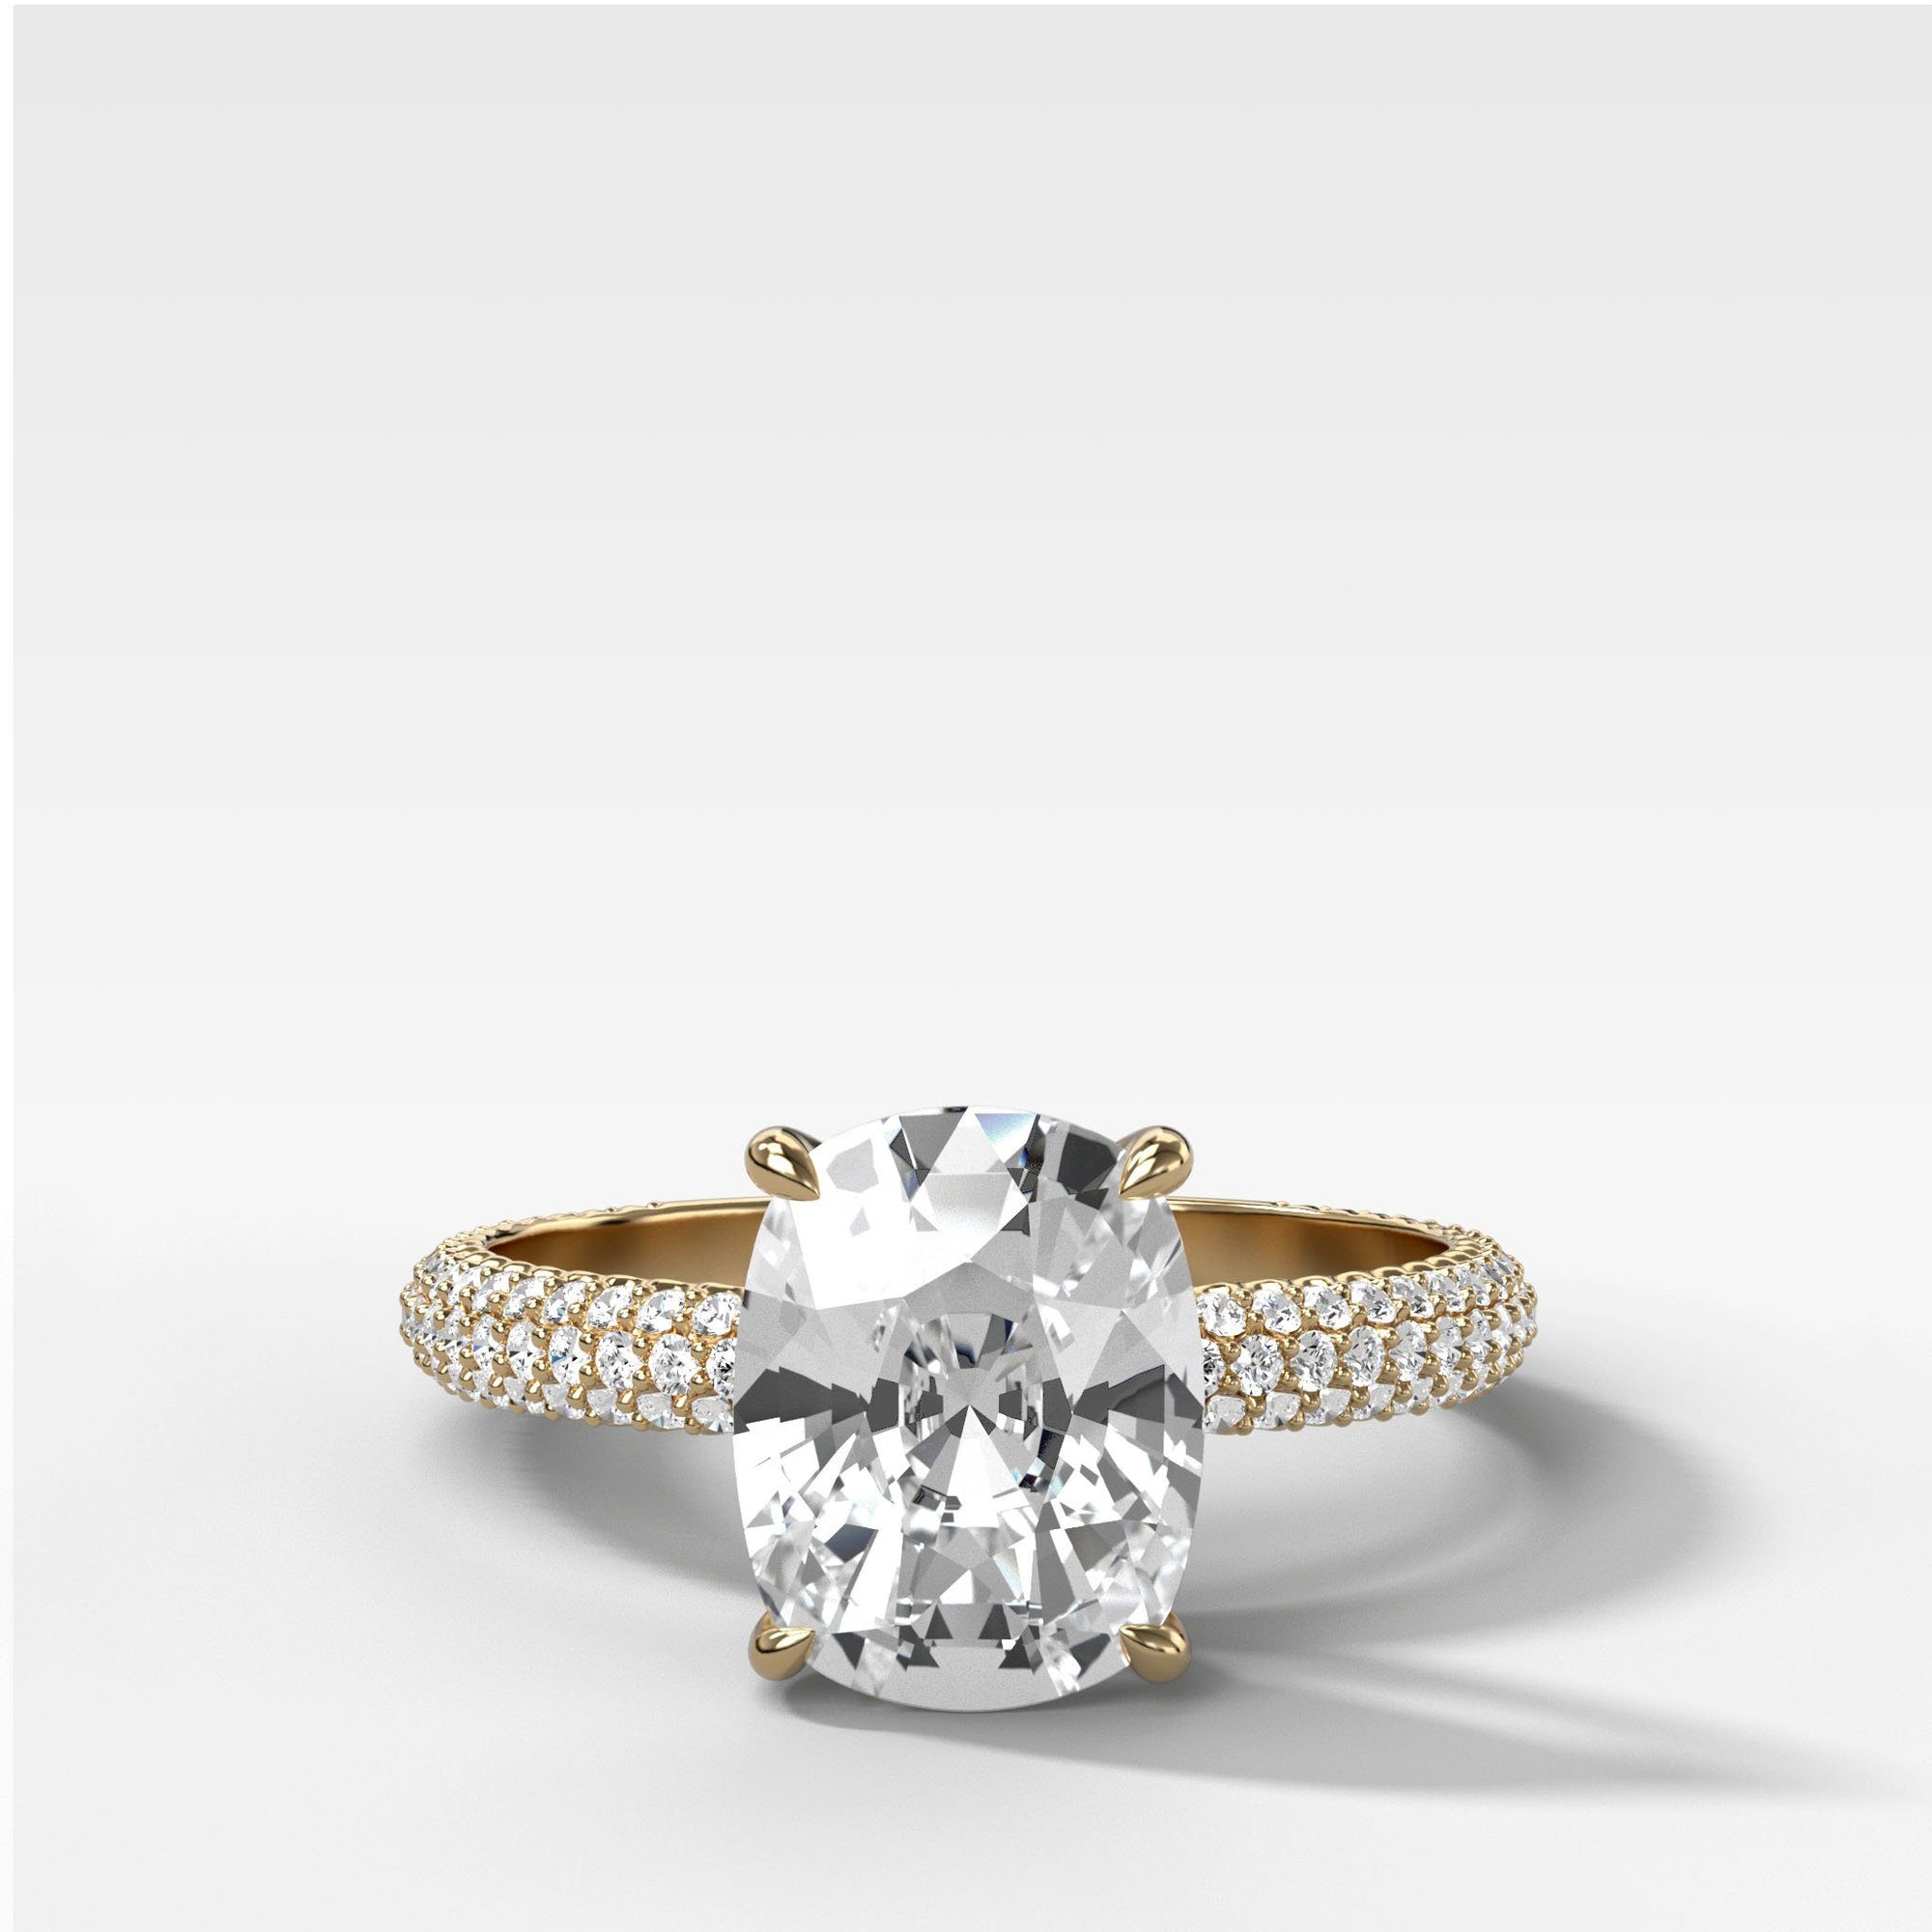 Triple Row Pavé Engagement Ring With Elongated Cushion Cut by Good Stone in Yellow Gold